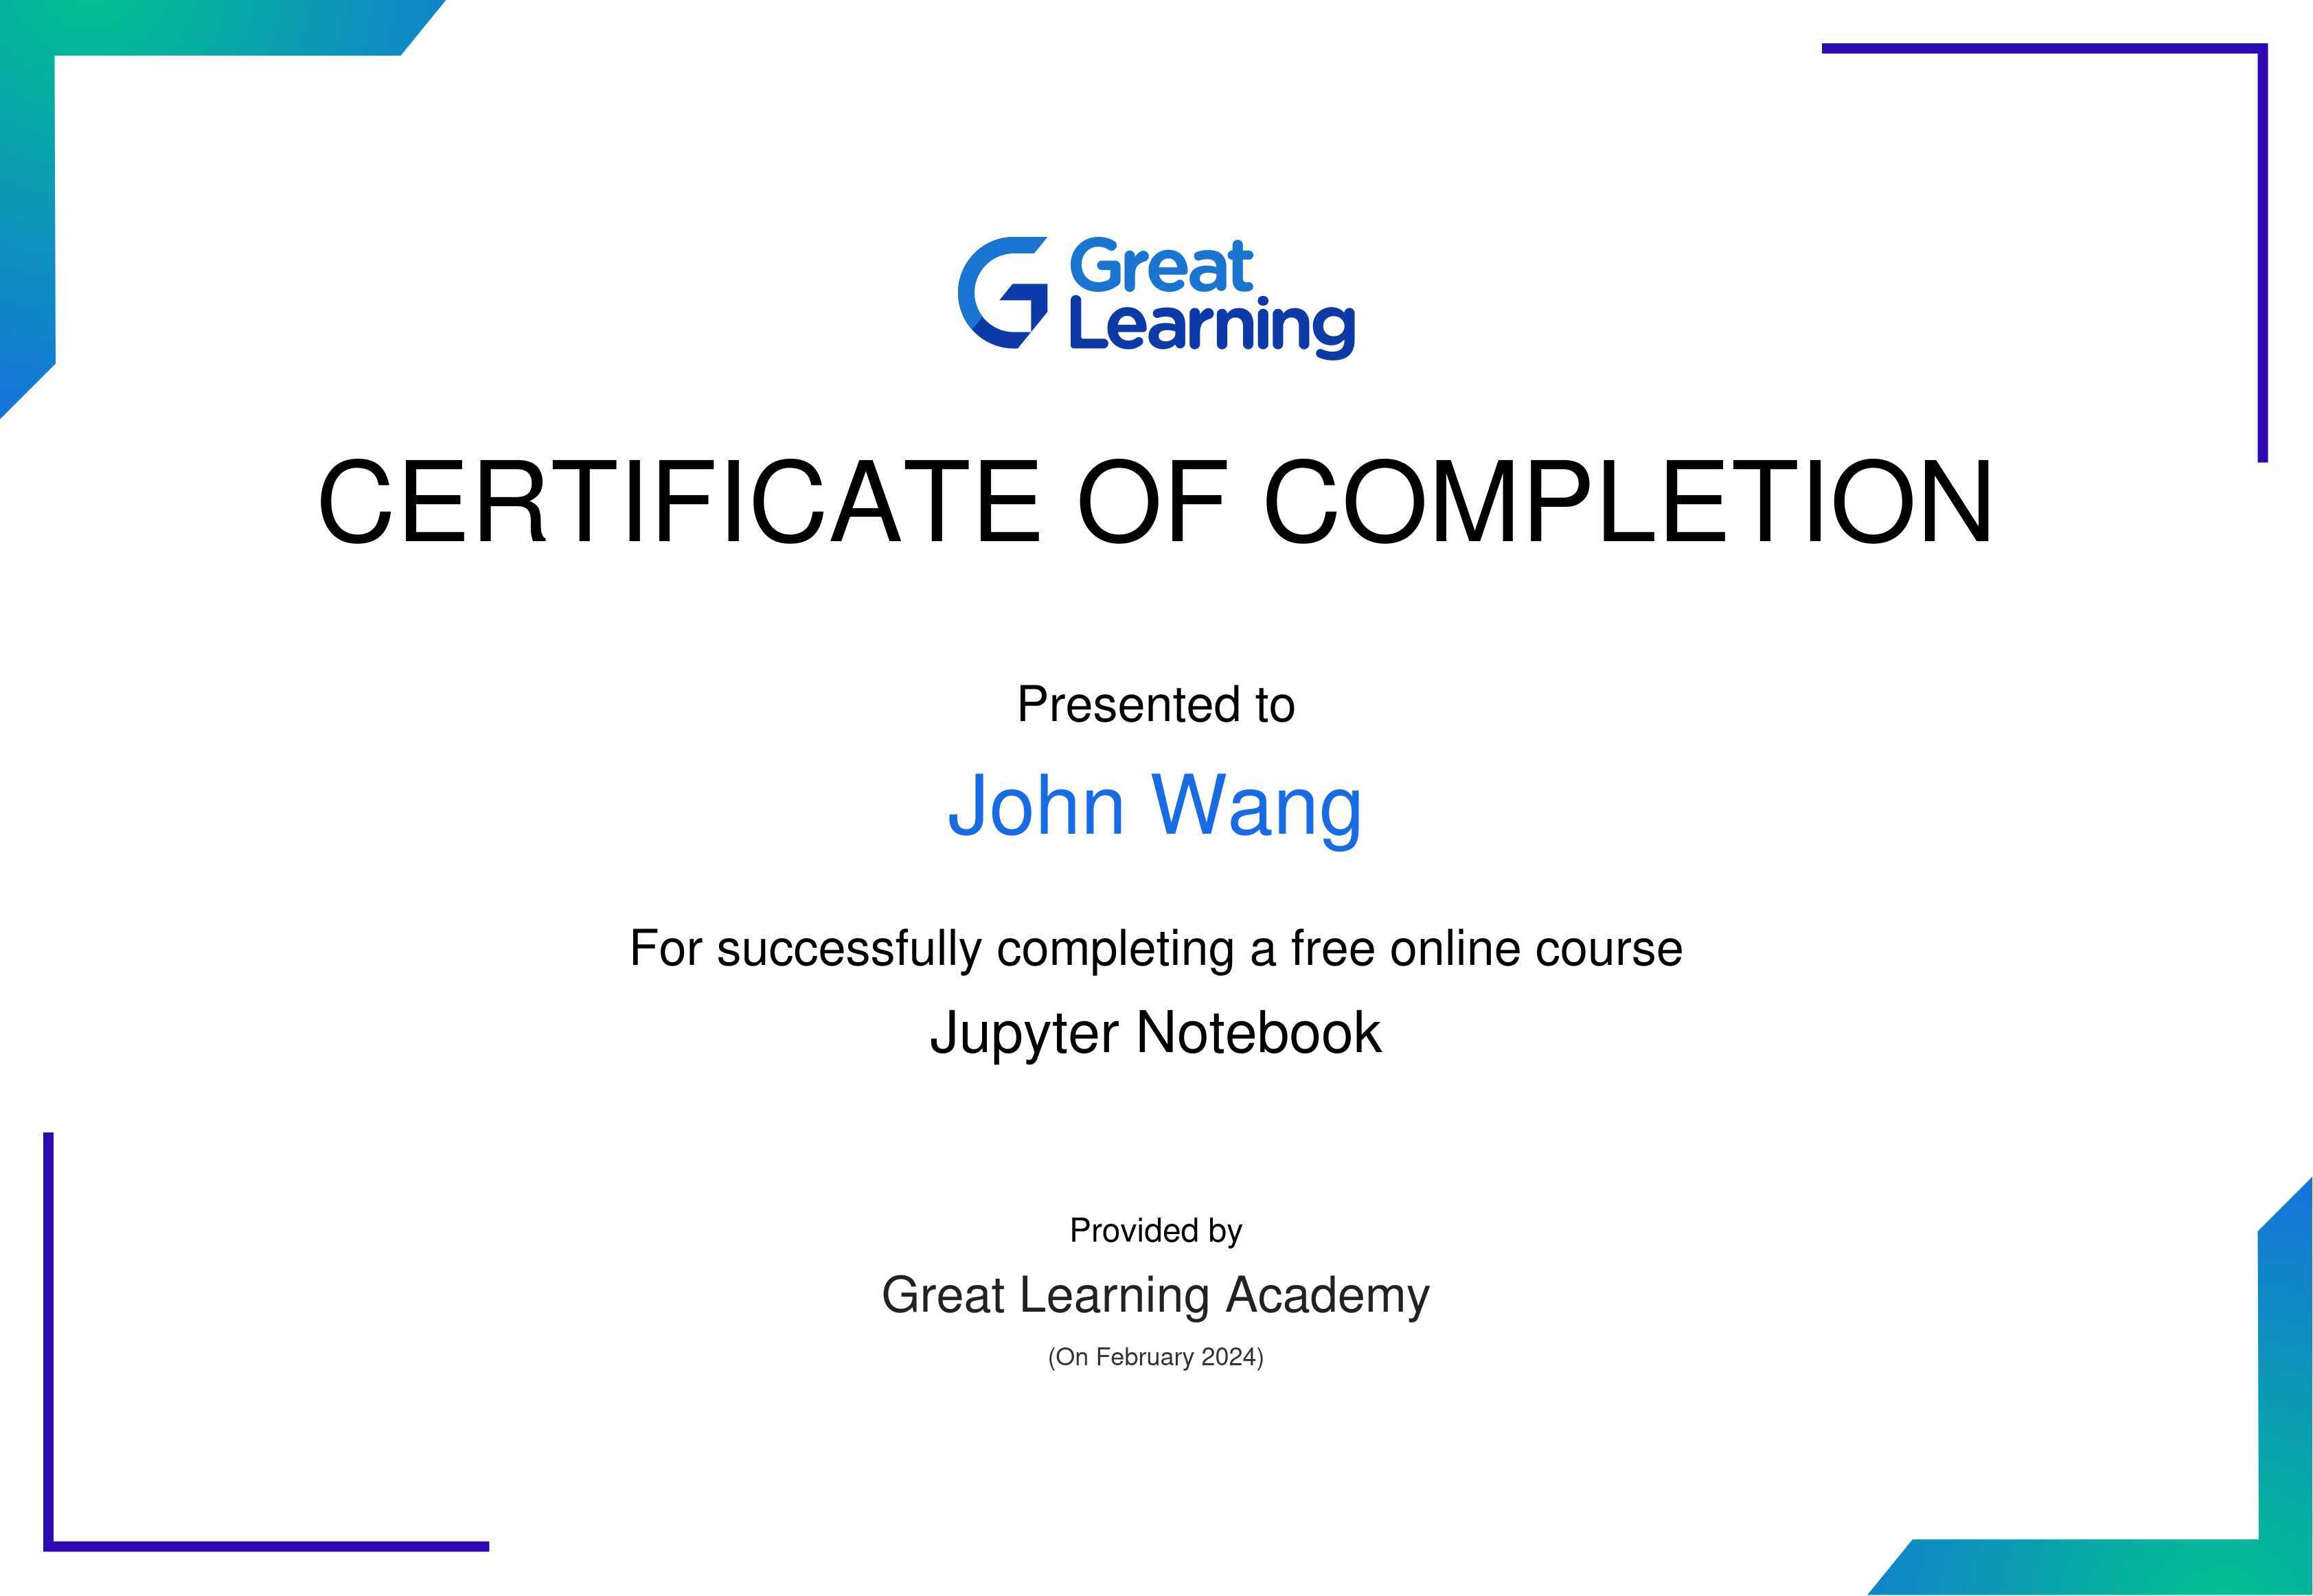 John's Jupyter Notebook from Great Learning Academy by Anirudh Rao